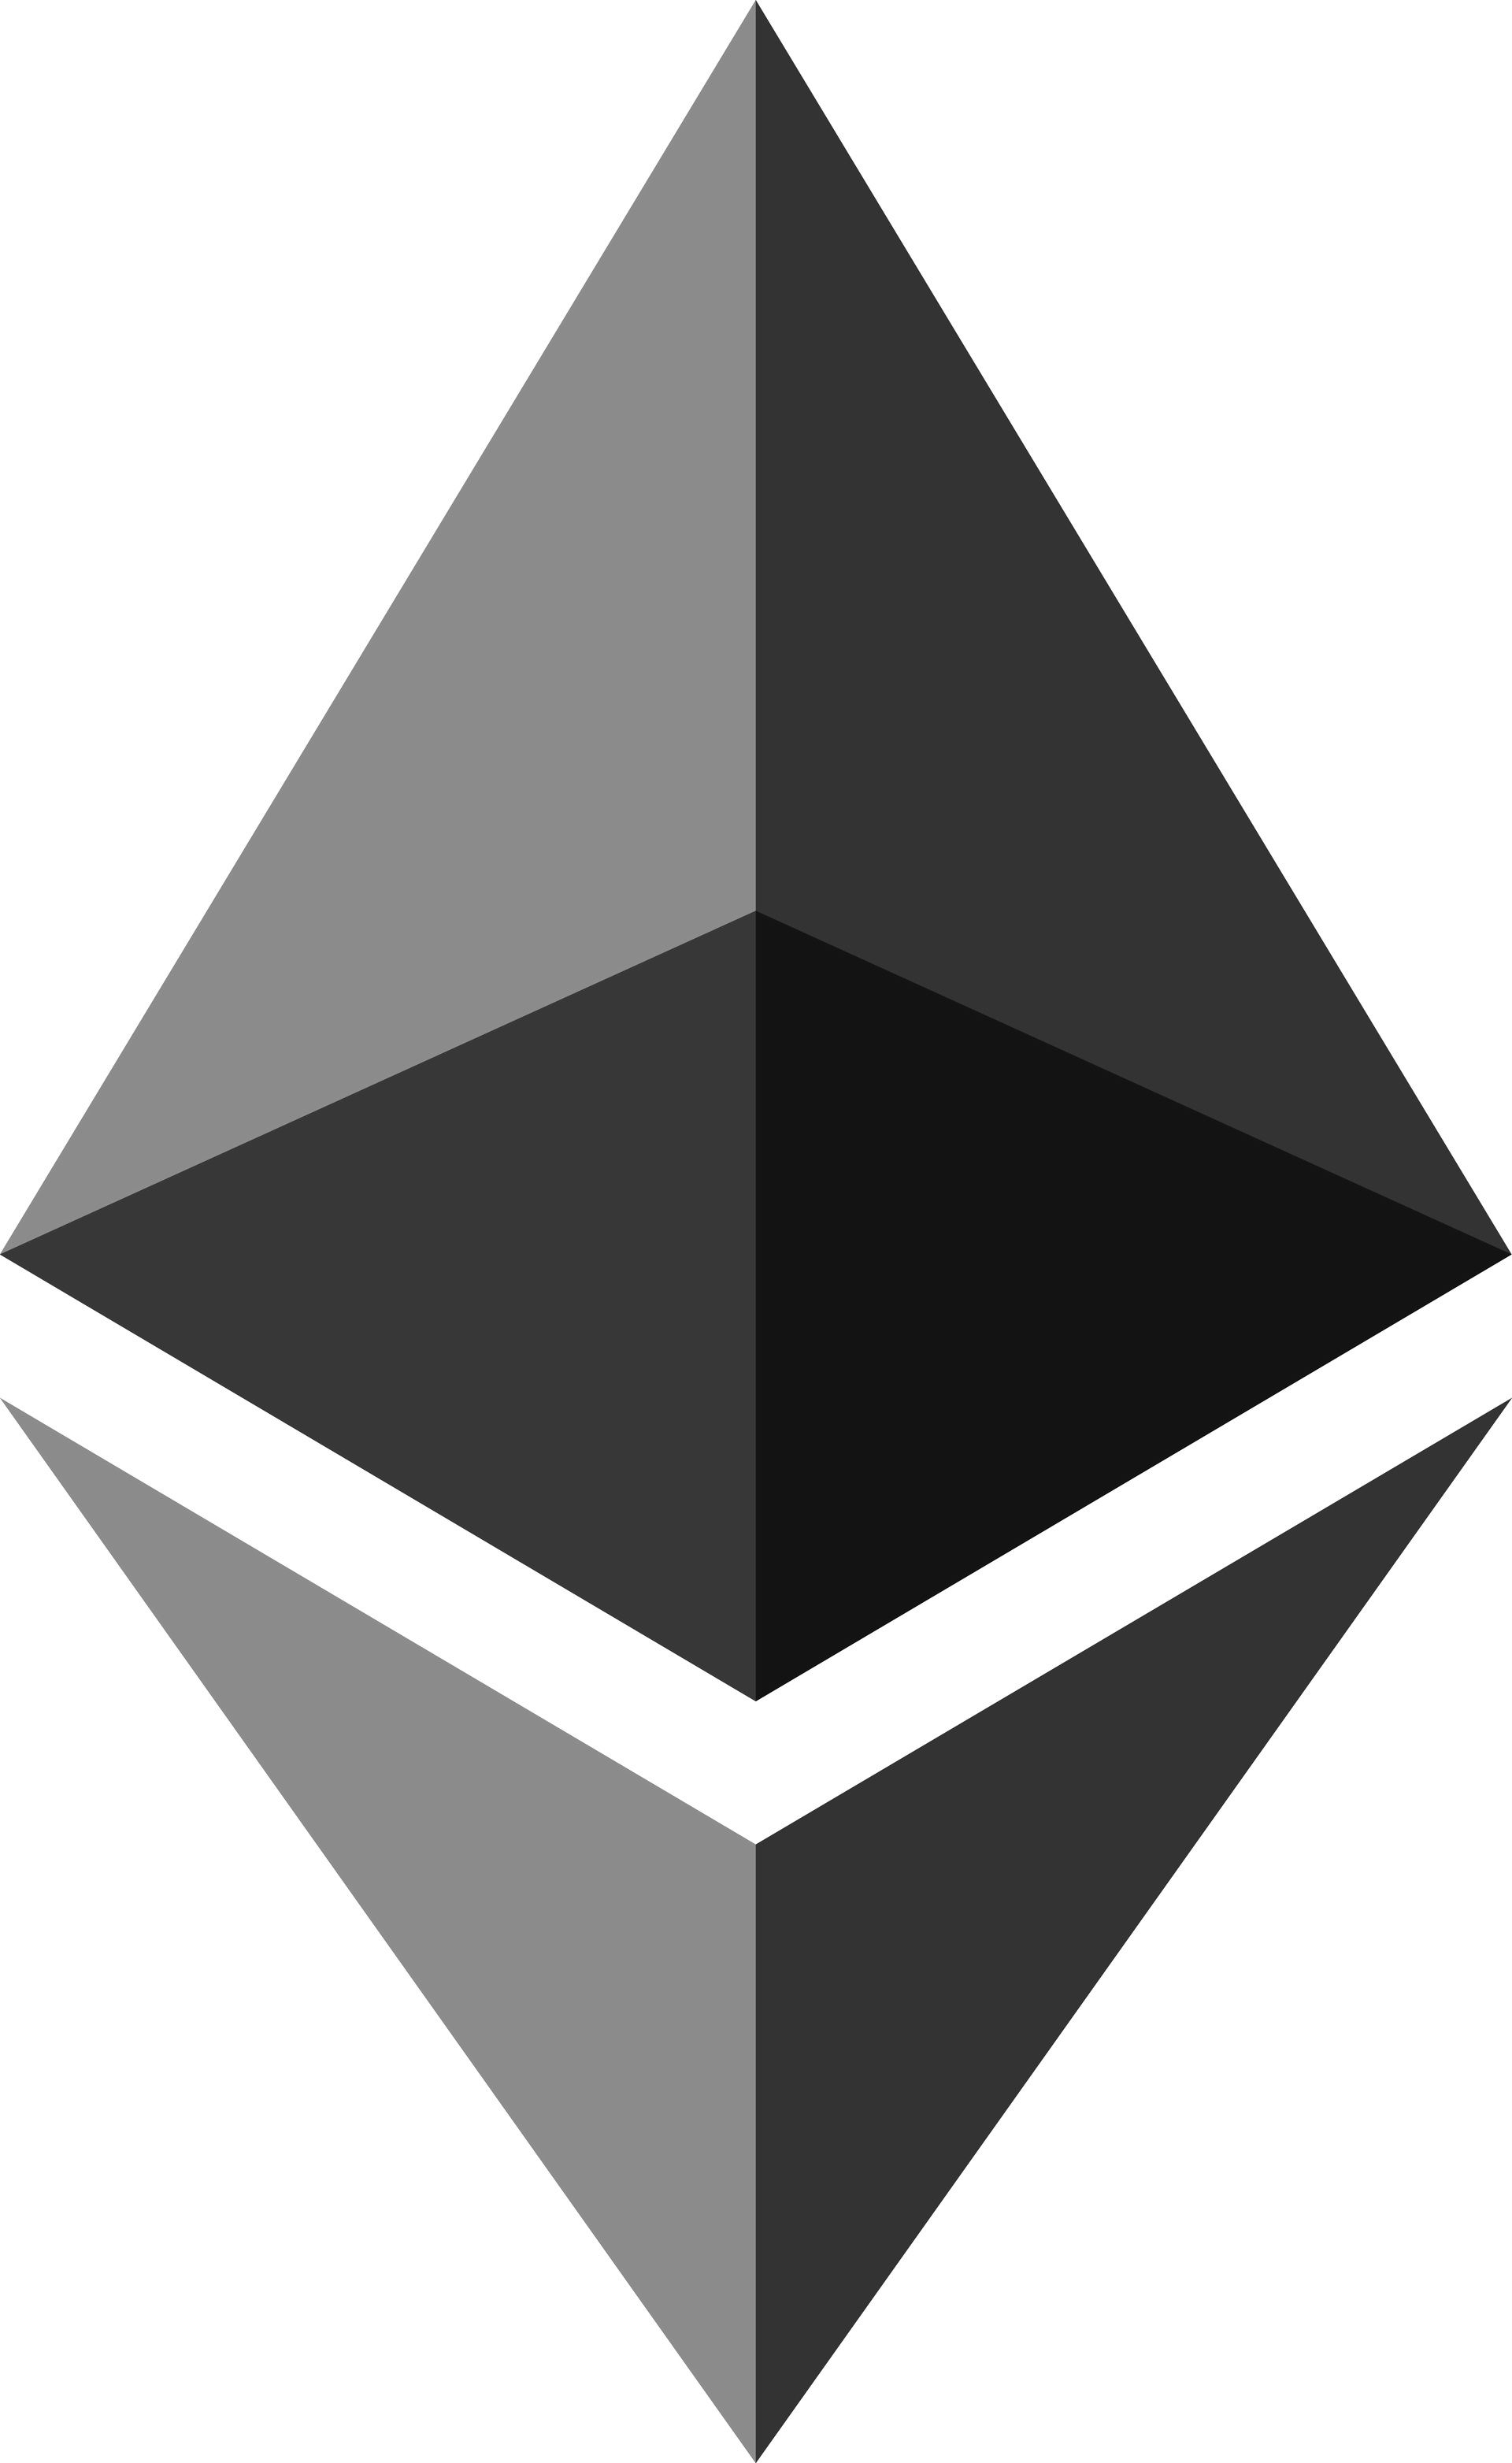 what is the ticker symbol for ethereum